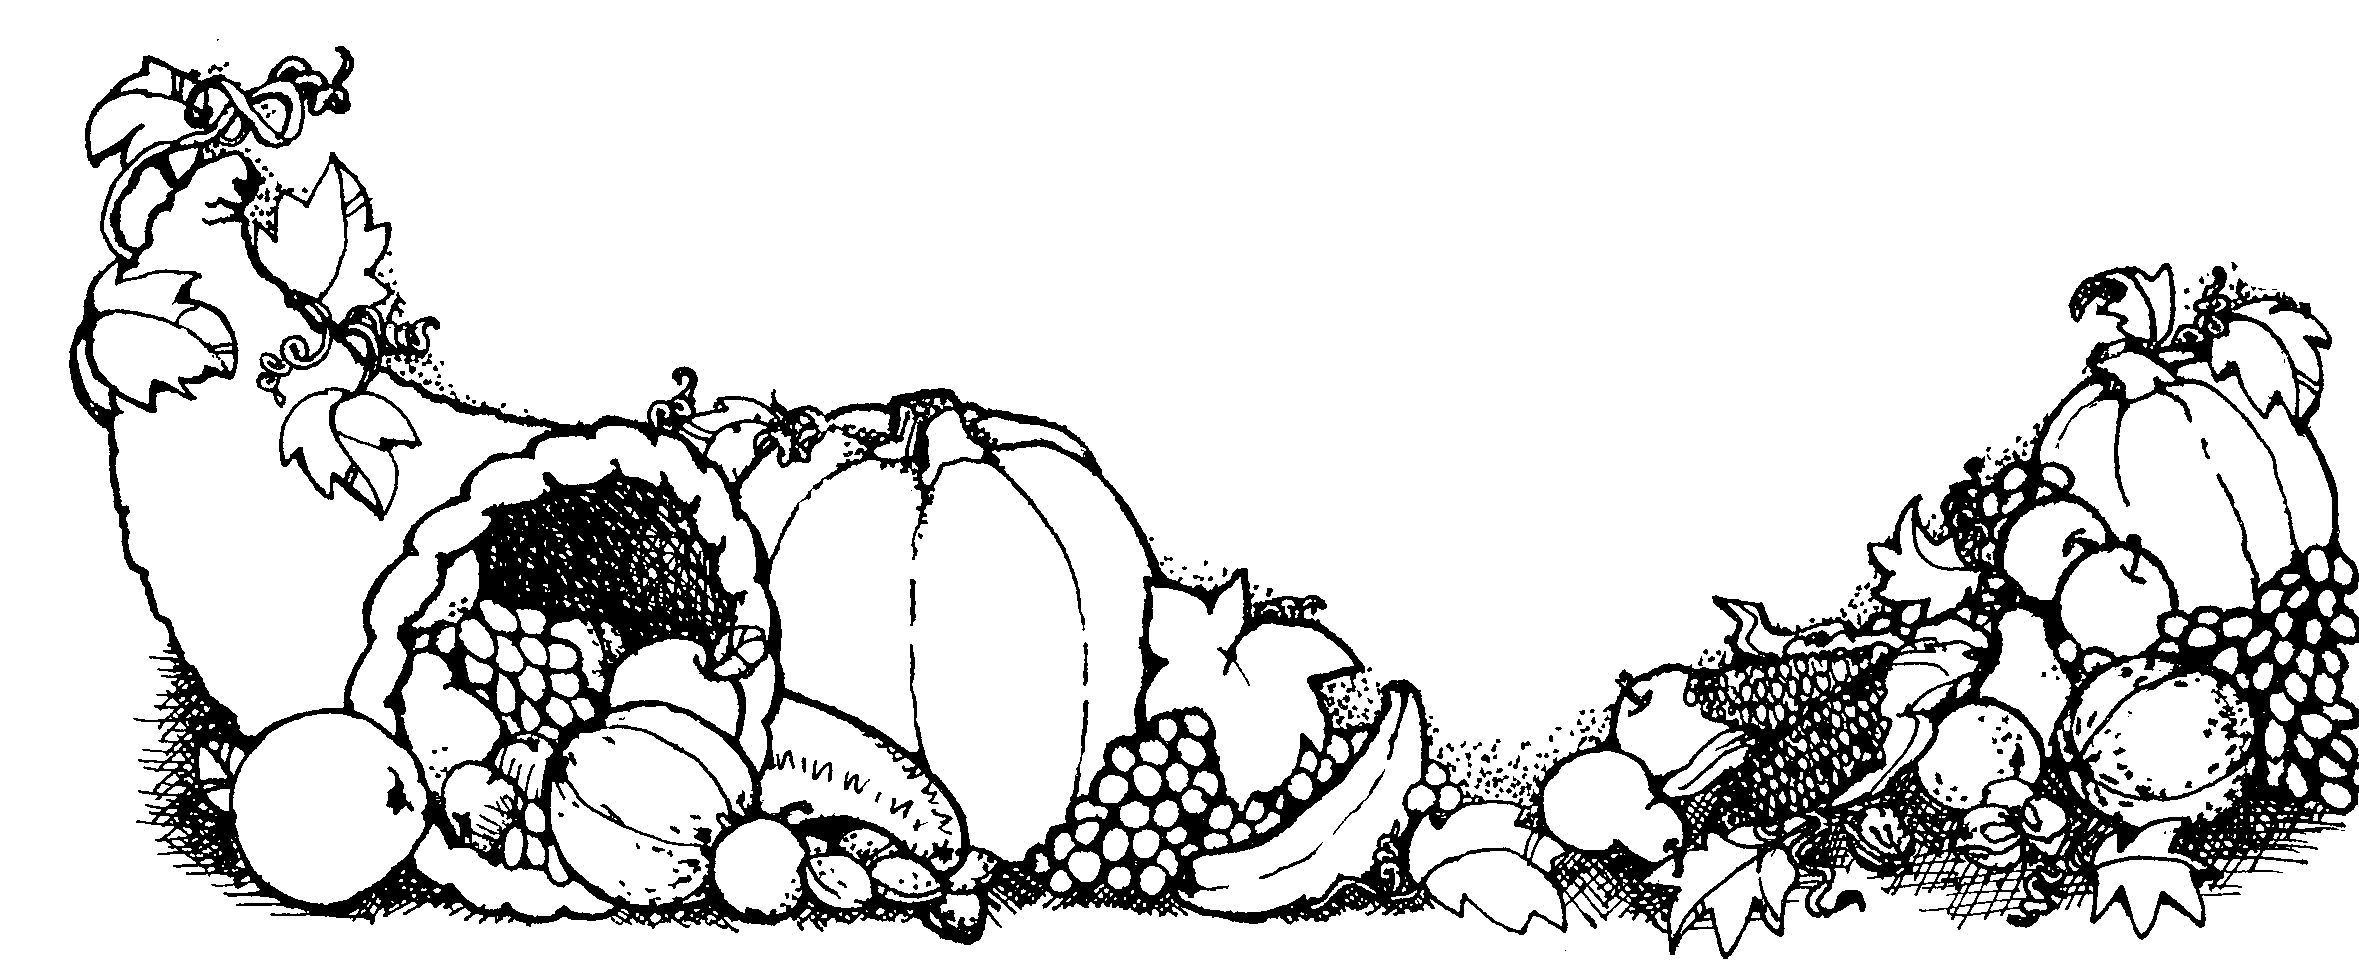 Thanksgiving dinner table black and white clipart